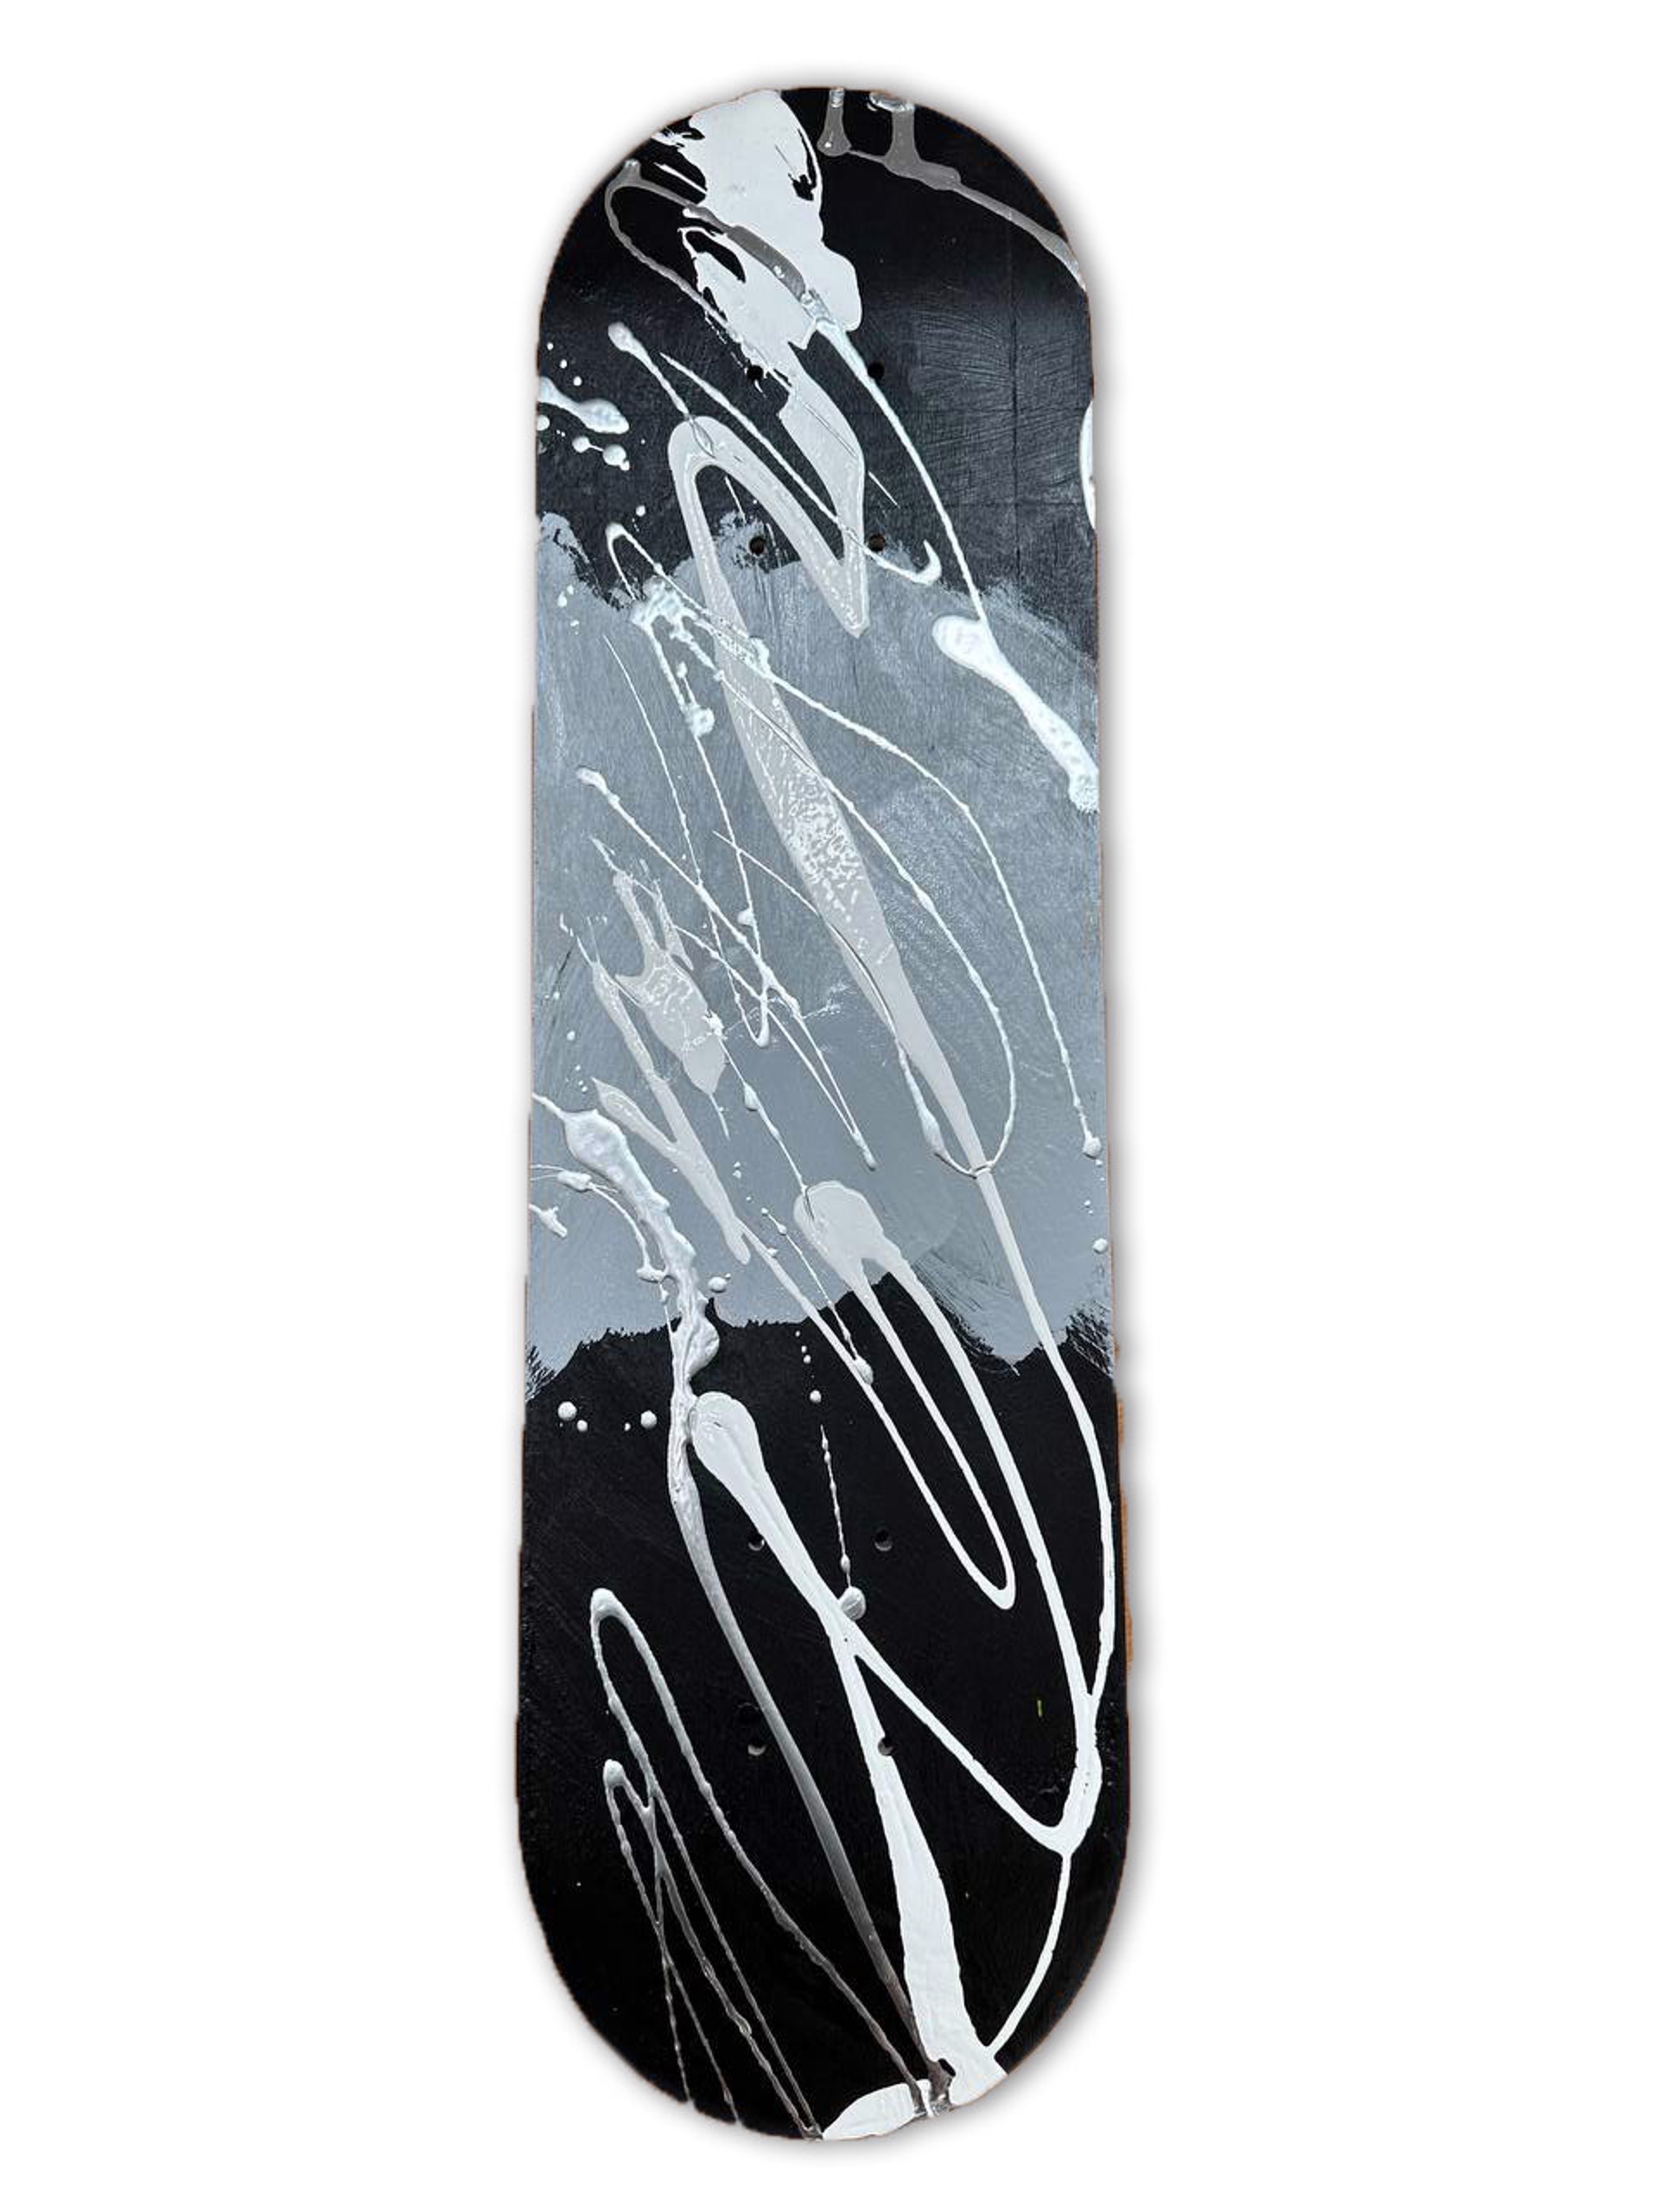 "Abstract Skateboard III (Black & White)" by Abstract Skateboards Wall Sculptures by Elena Bulatova